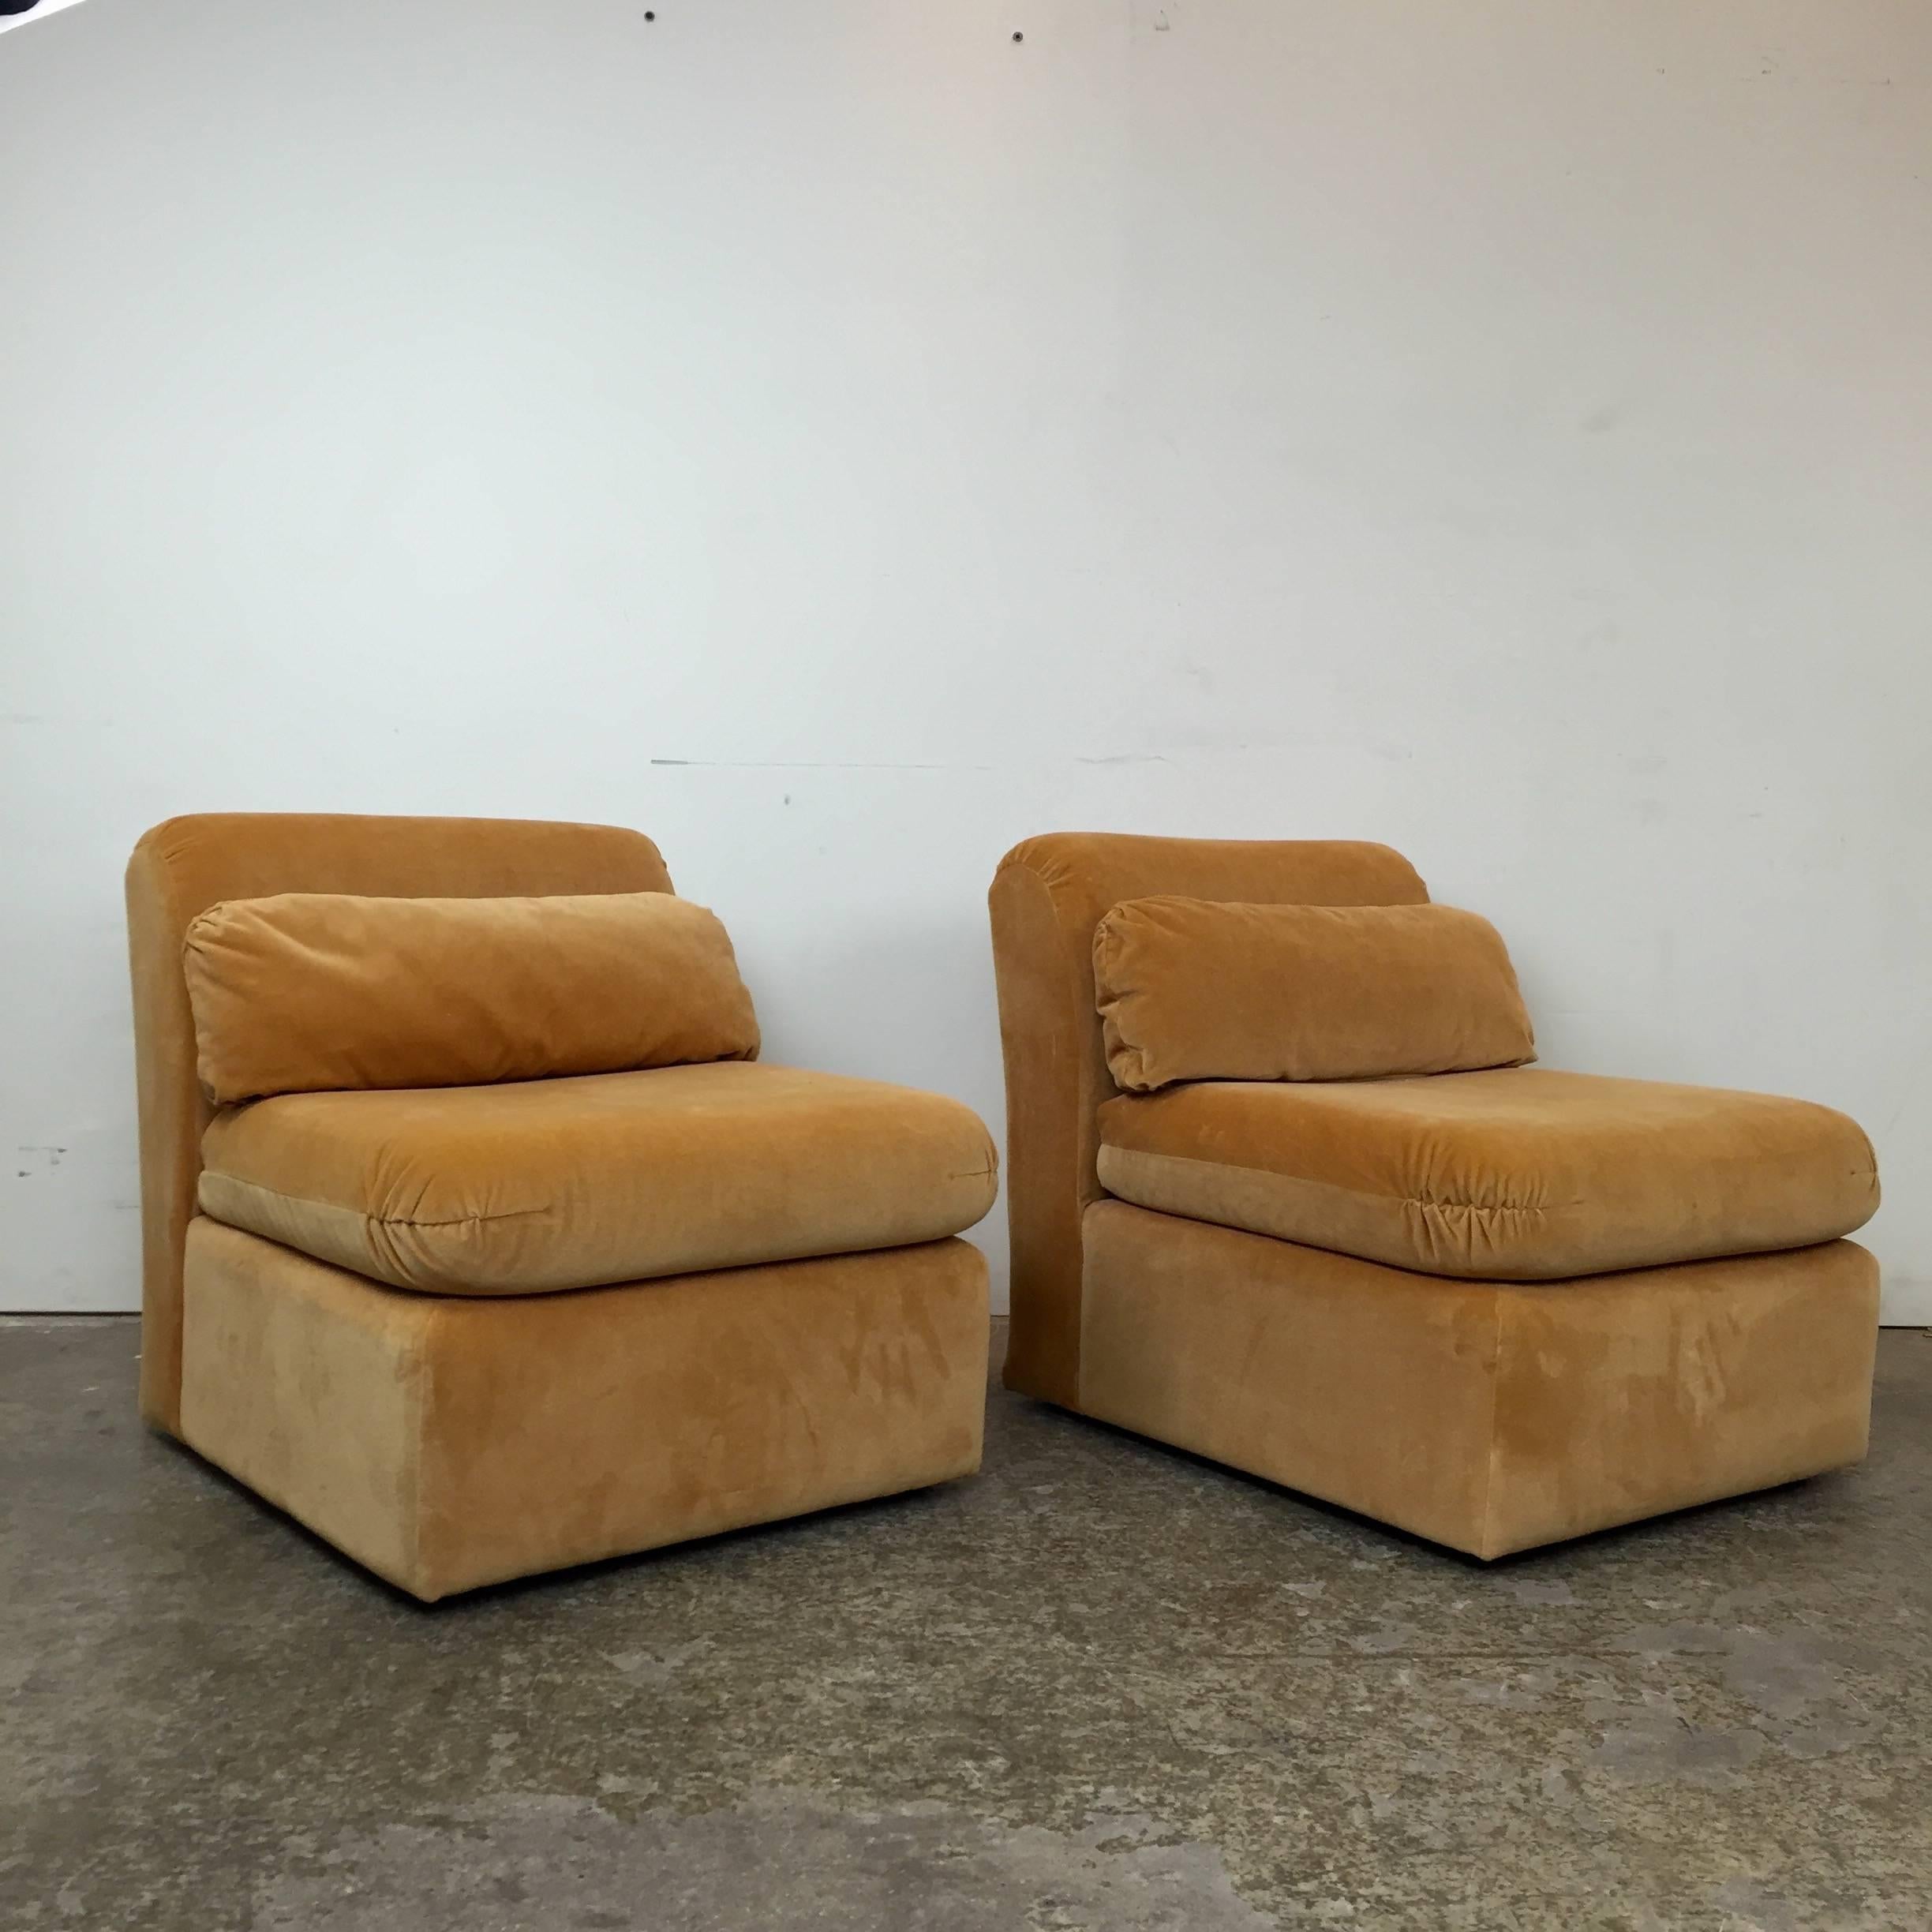 Pair of 1970s cube slipper chairs designed by 1960s famed Texas interior designer Howard Goldman. These fun chairs can be used together or separated.

Dimensions: 25